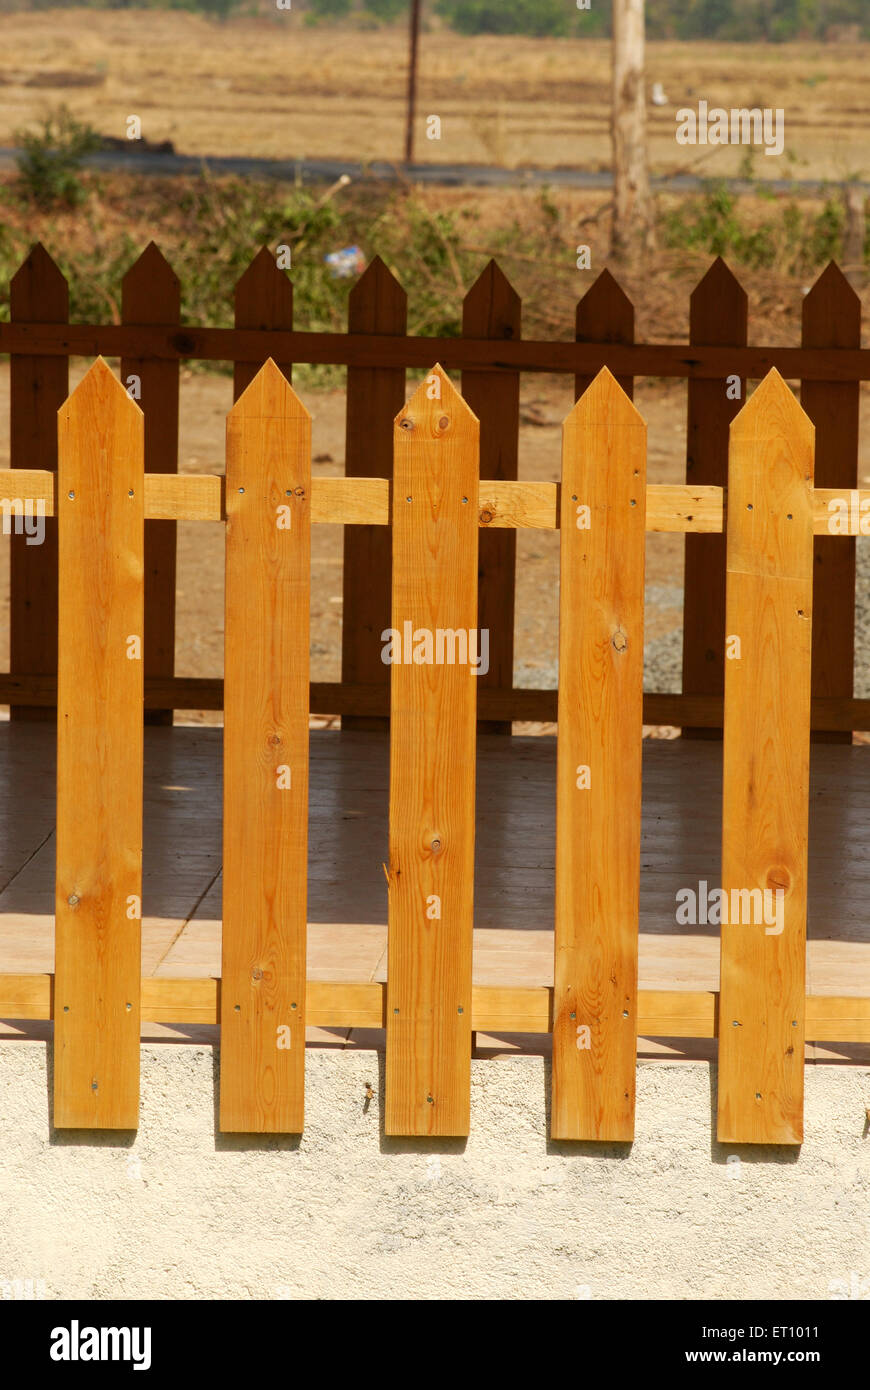 Railing of wooden strips Stock Photo